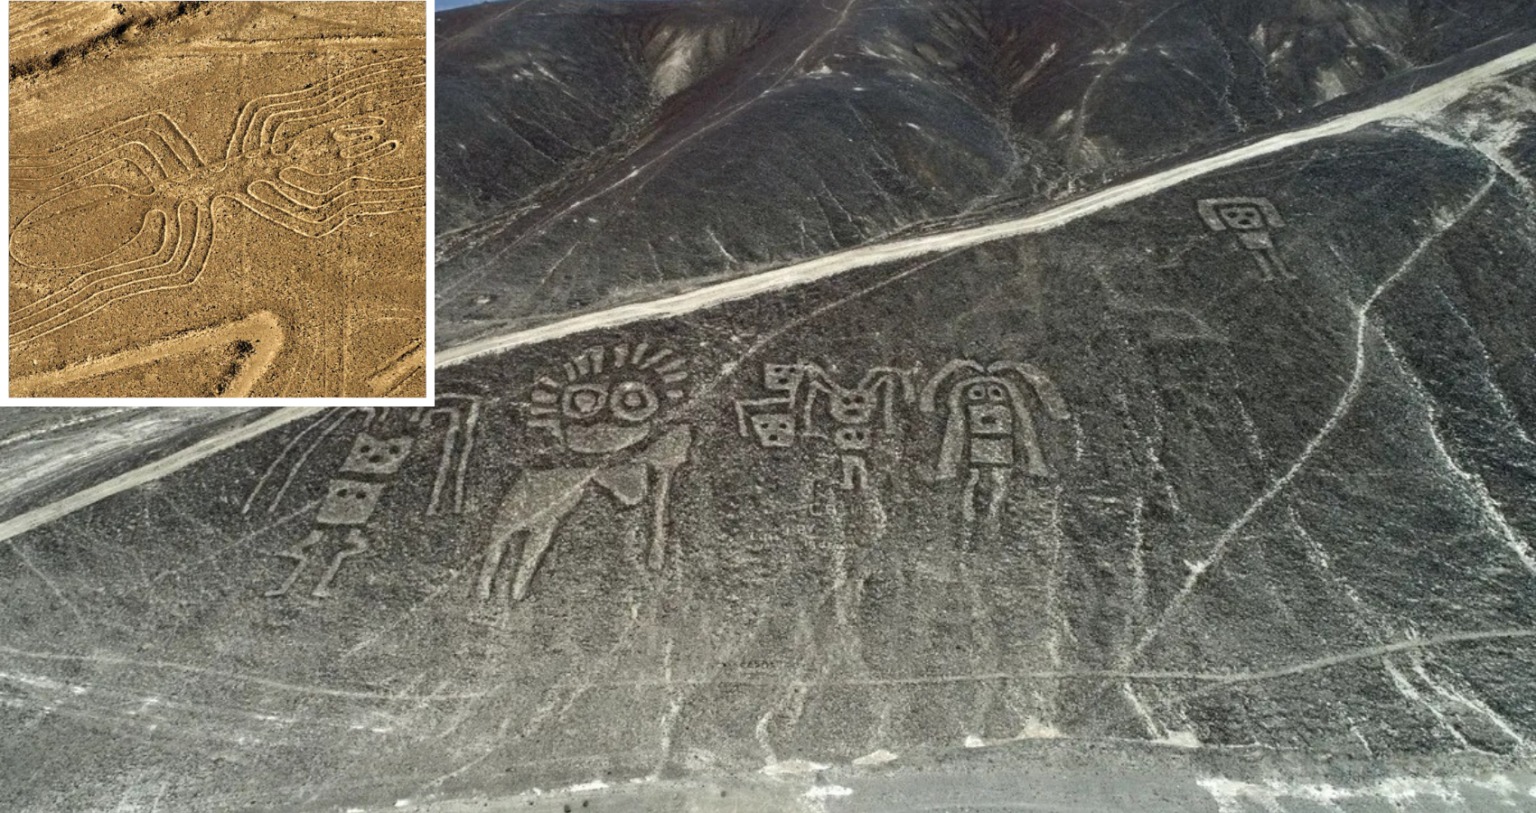 More than 150 geoglyphs were added to 2,000-year-old Nasca Lines